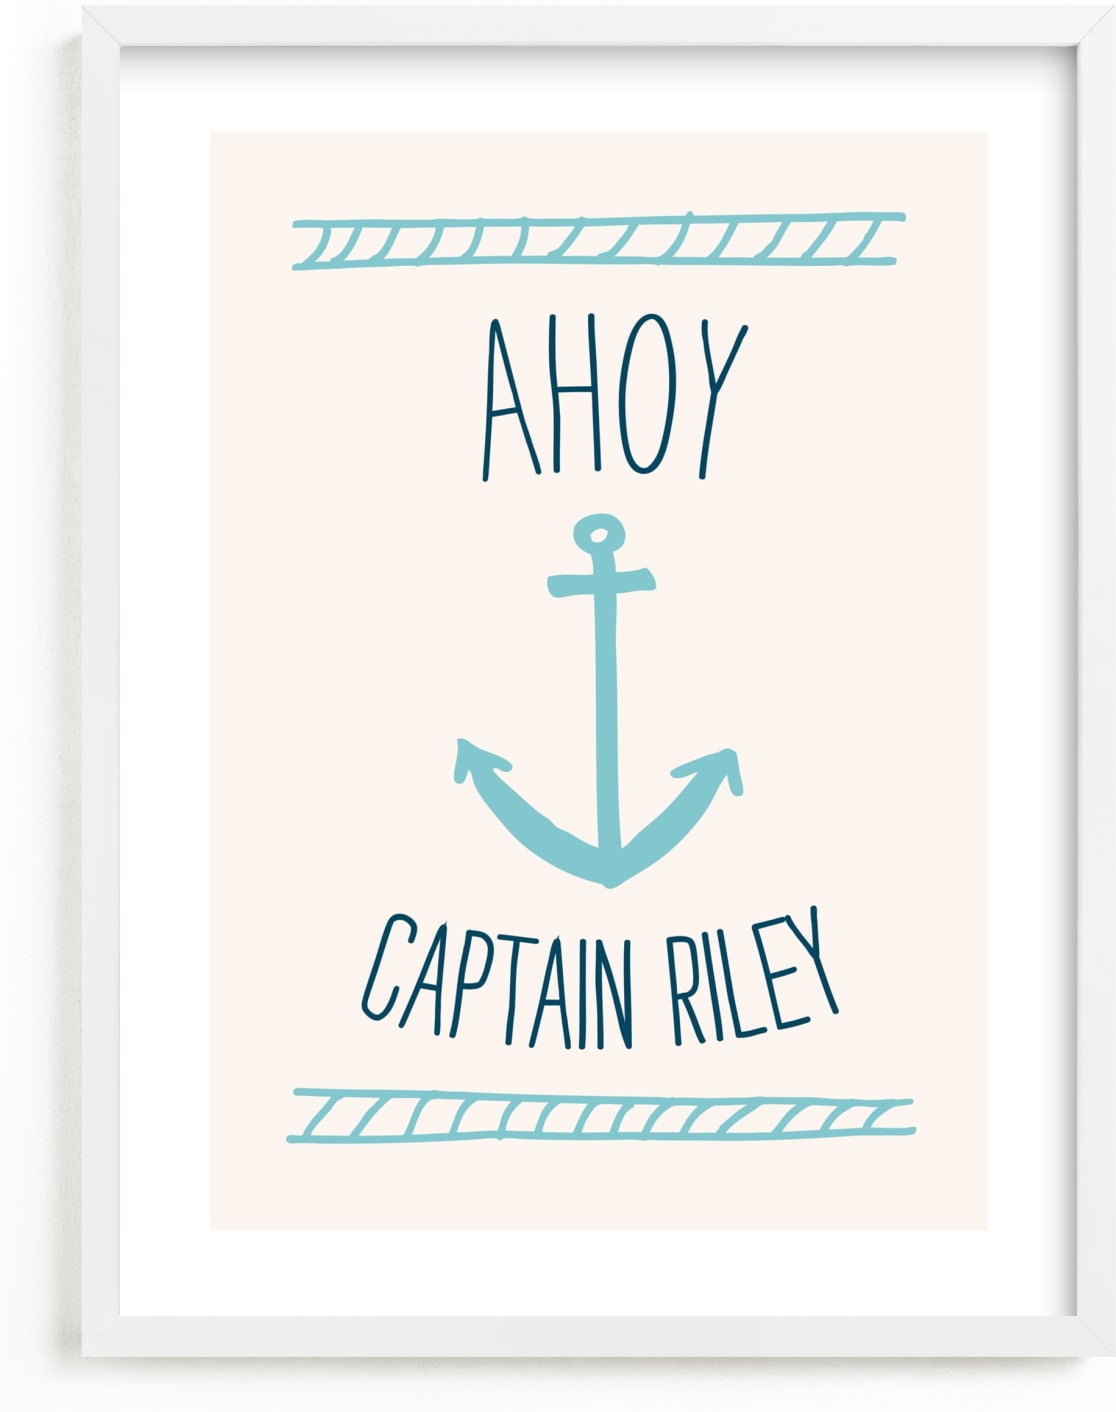 This is a blue personalized art for kid by Shari Margolin called Ahoy Matey.